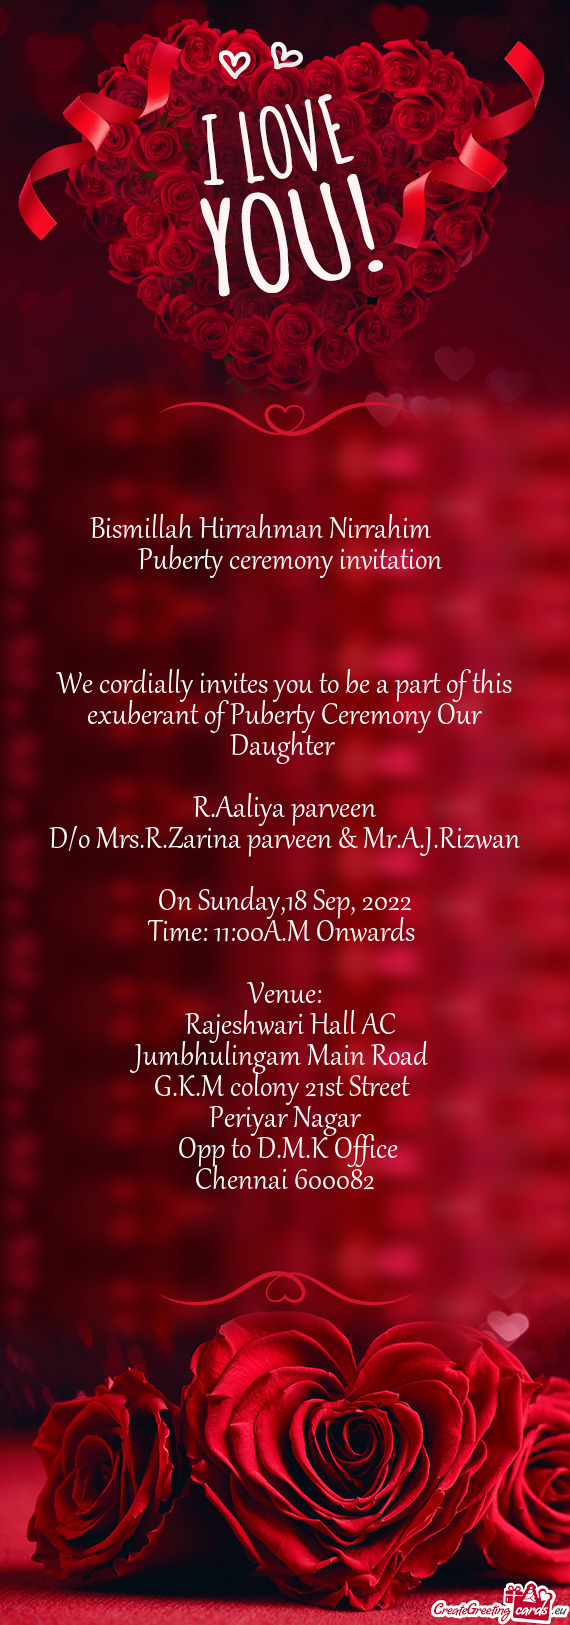 We cordially invites you to be a part of this exuberant of Puberty Ceremony Our Daughter